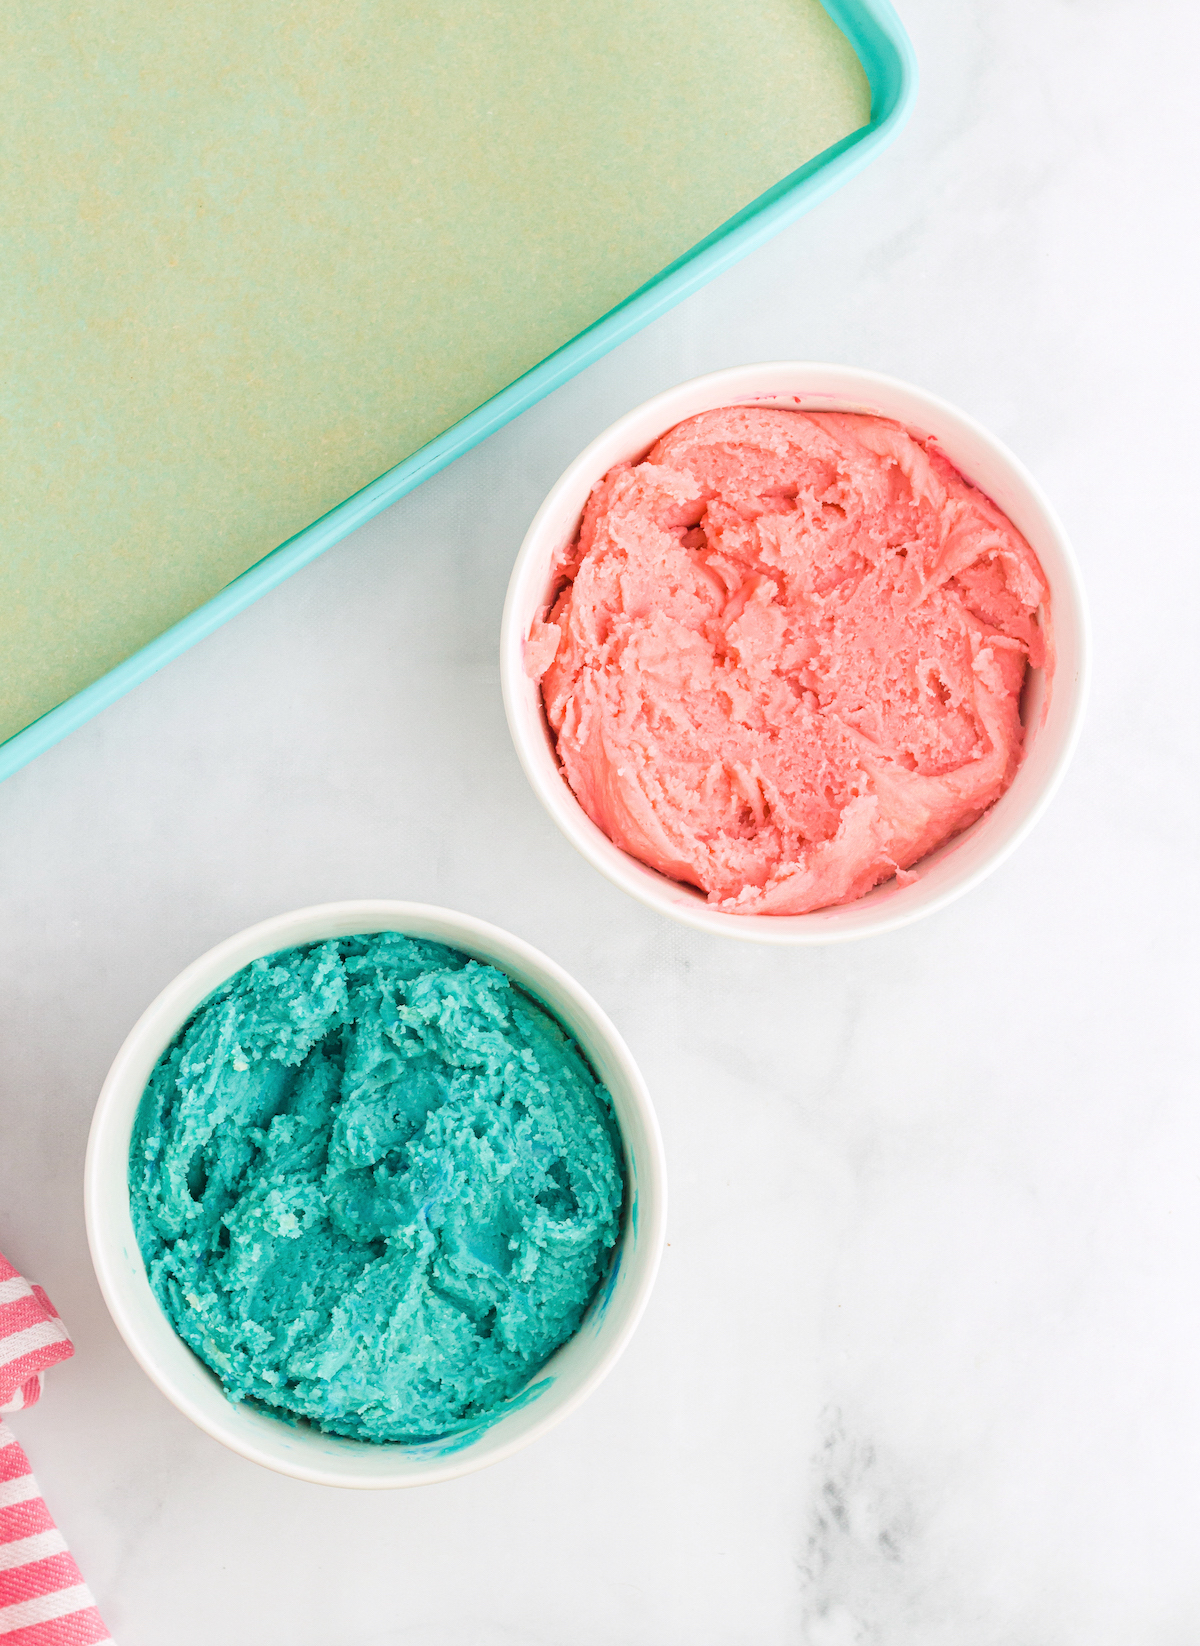 Dough split into two bowls with one colored pink and the other blue